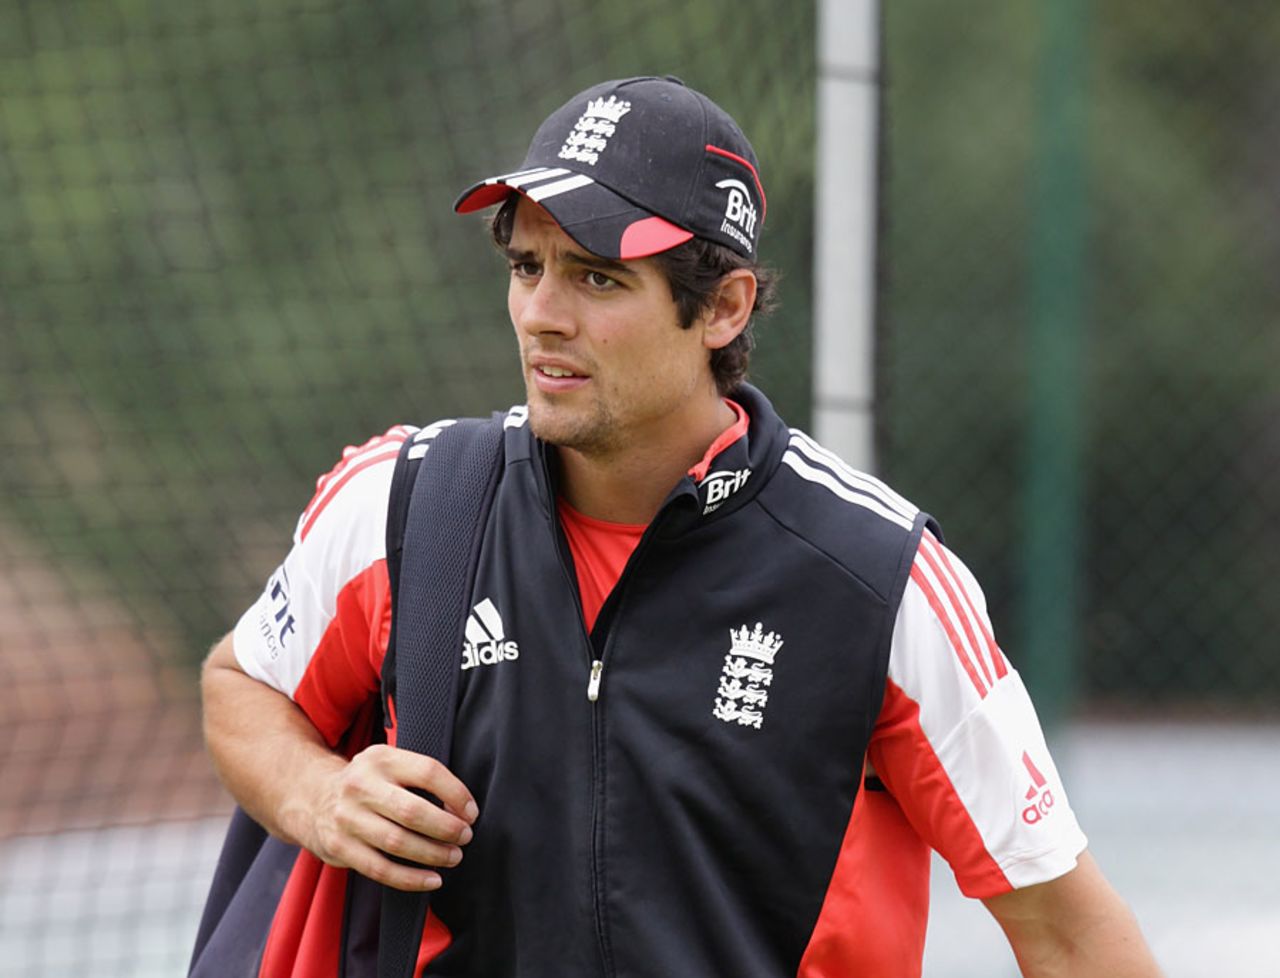 Alastair Cook is looking to clinch a series victory in his first series as full-time ODI captain, July 8 2010